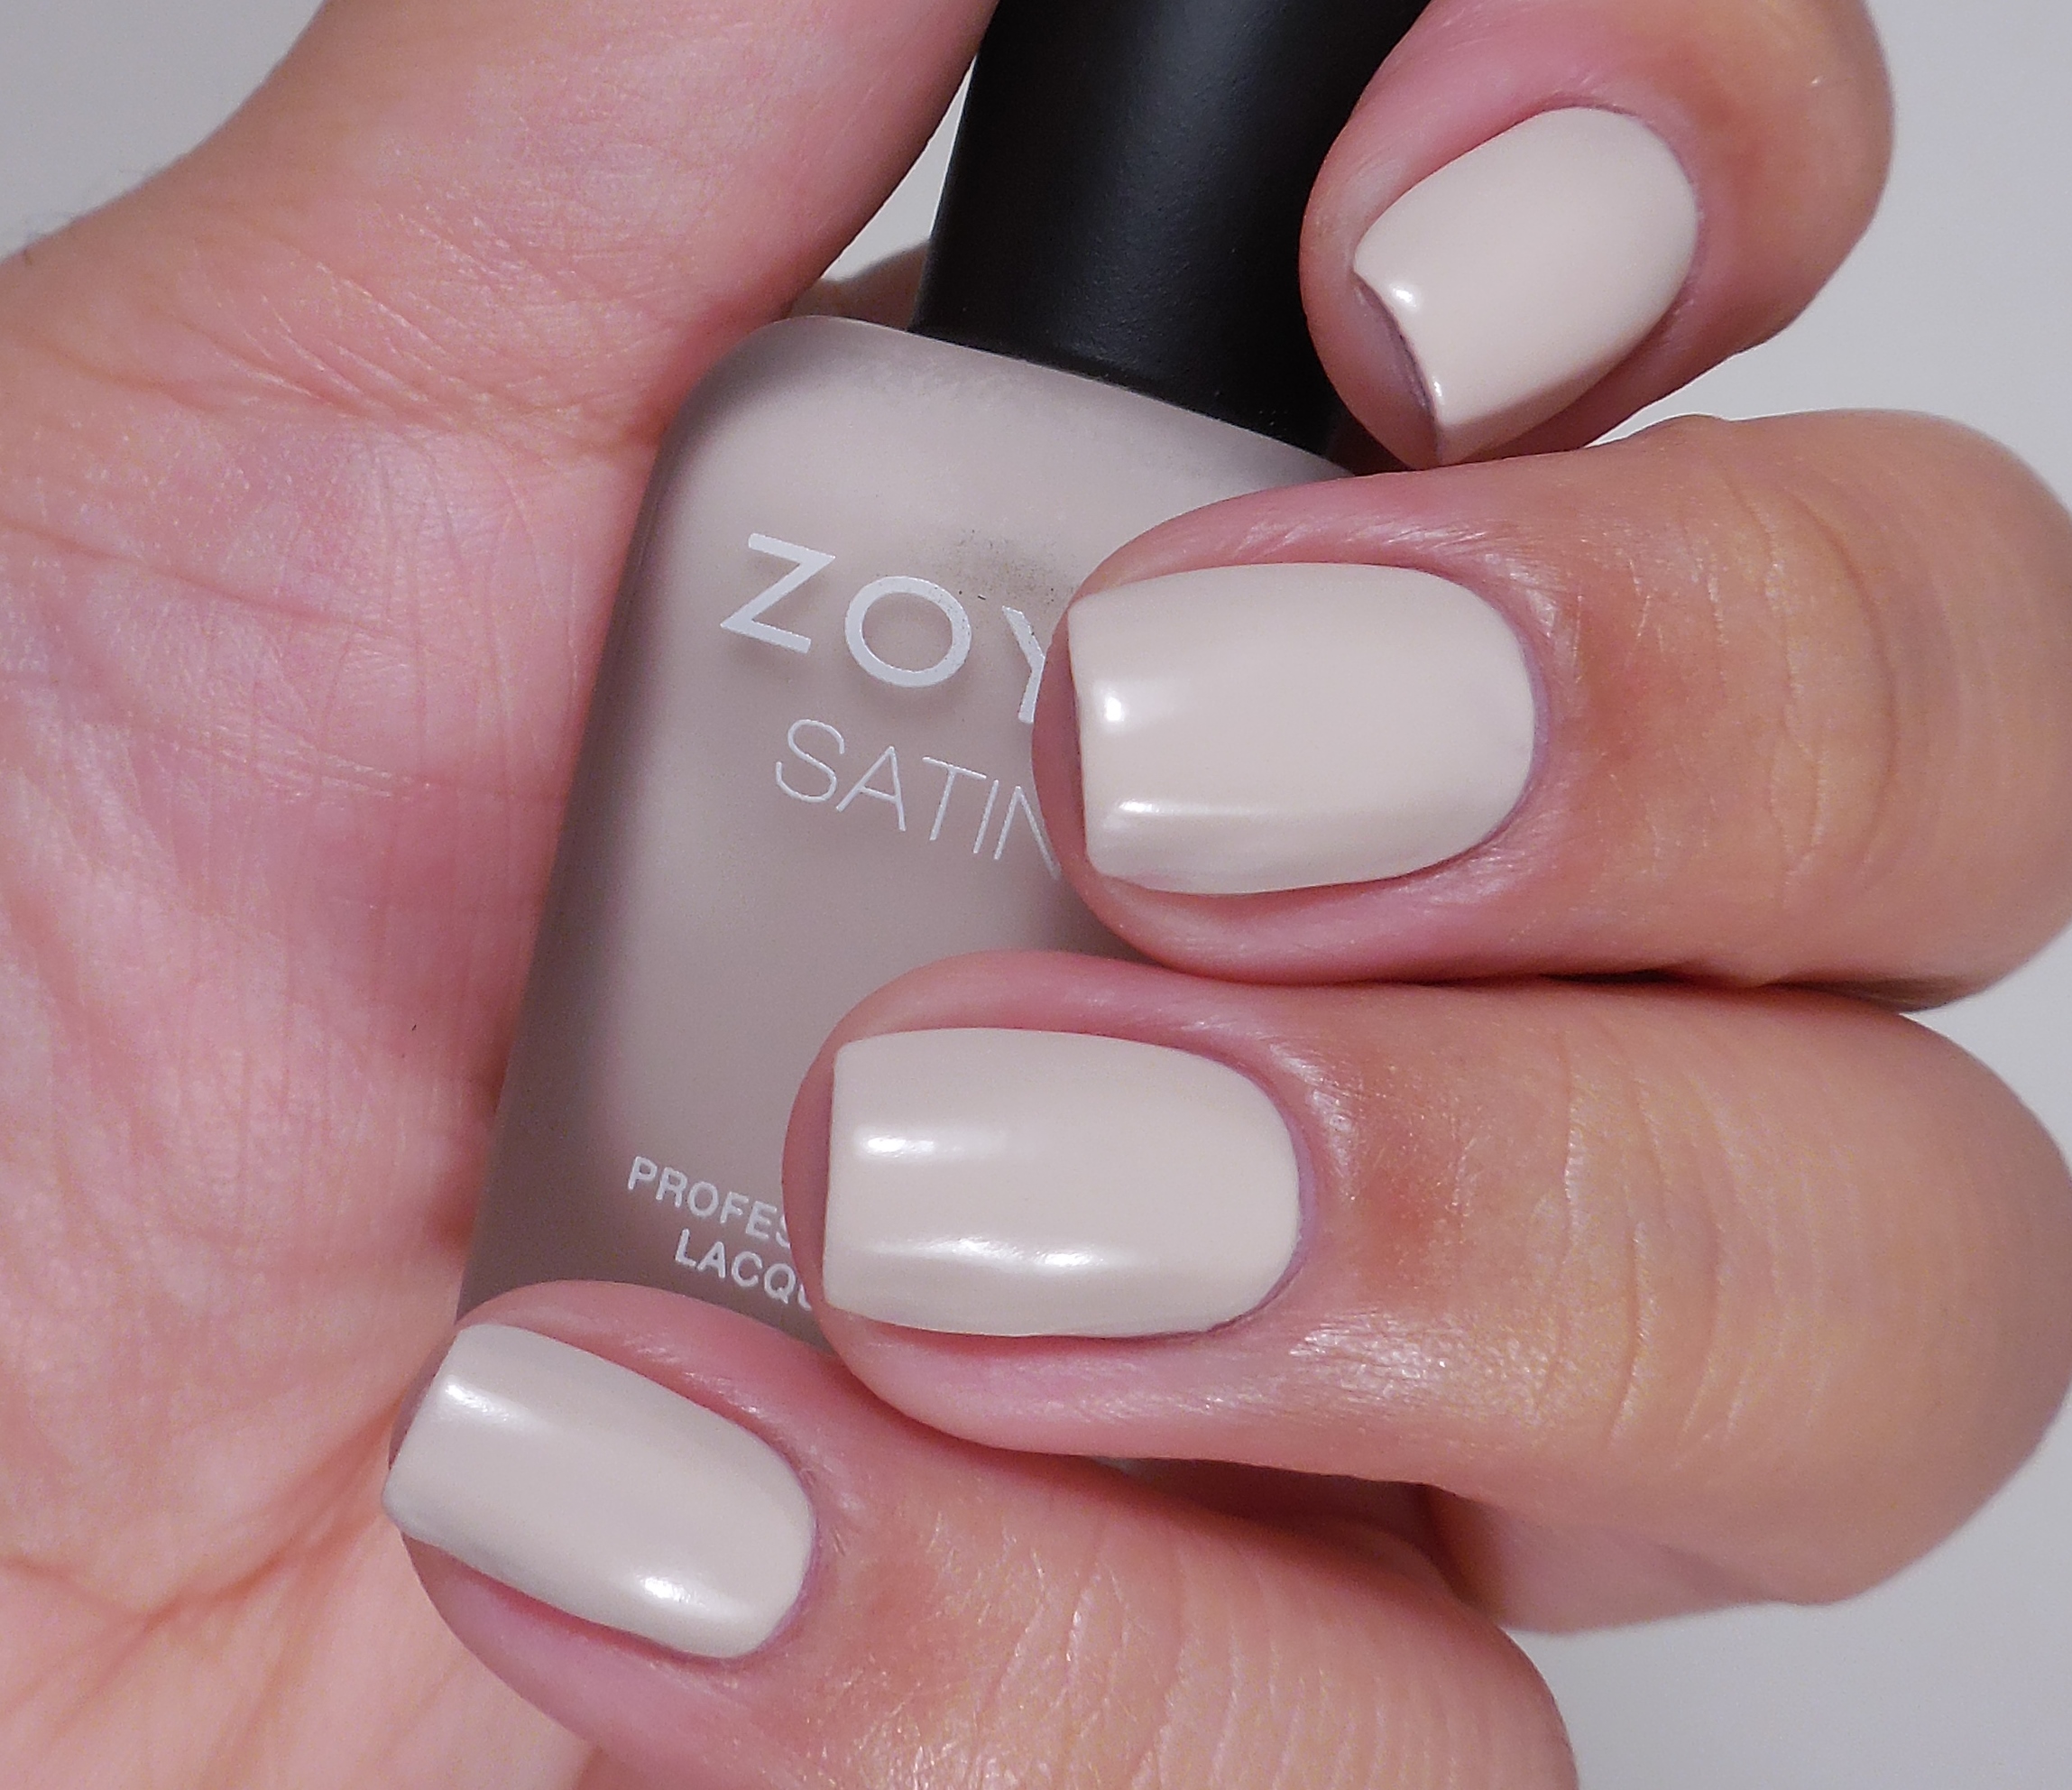 Swatch and Review: Zoya Naked Manicure System | Naked manicure, Manicure, Zoya  nail polish pink